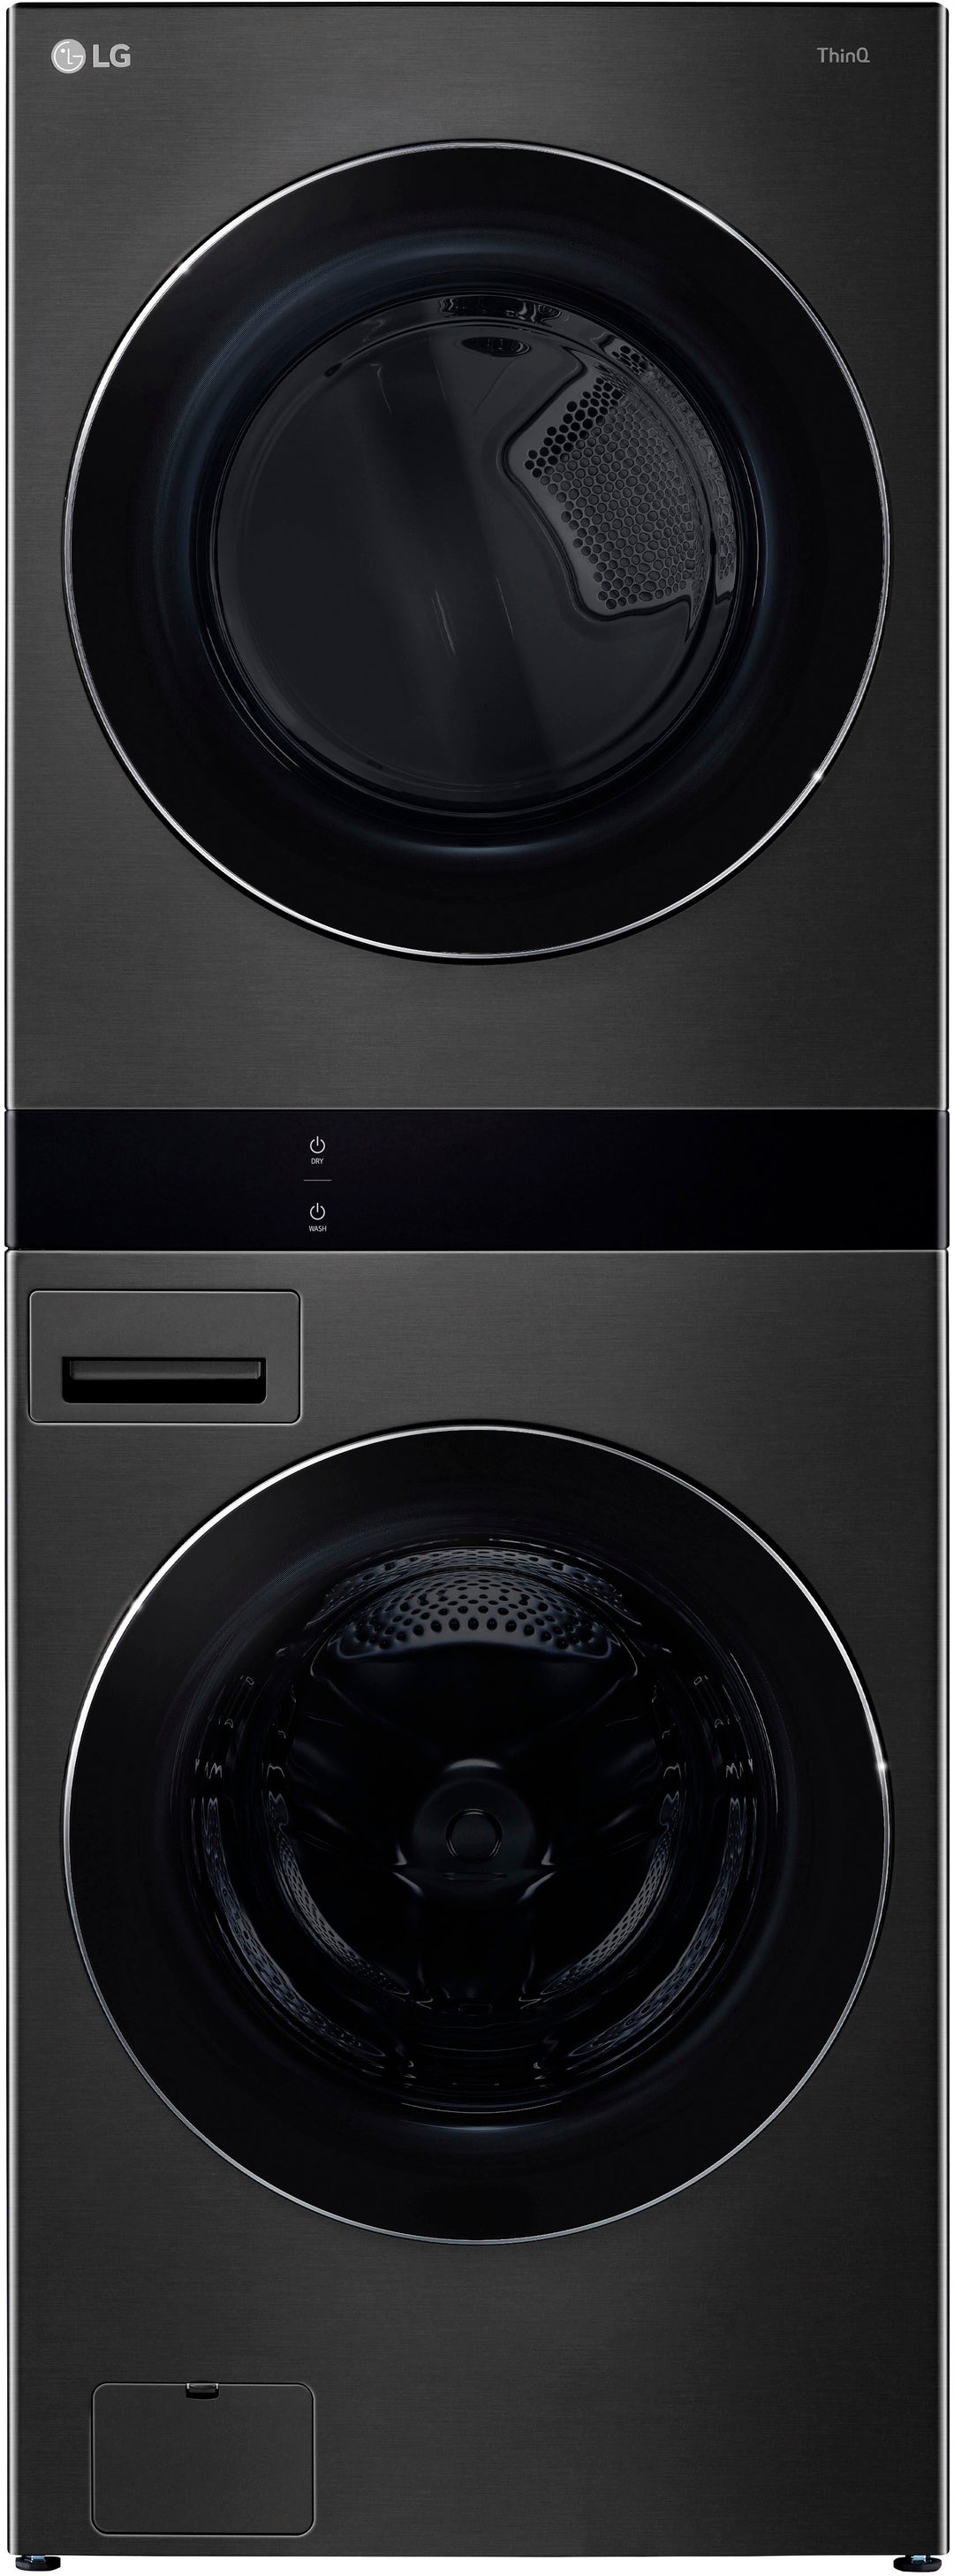 LG - 5.0 Cu. Ft. HE Smart Front Load Washer and 7.4 Cu. Ft. Gas Dryer WashTower with Steam and Center Control - Black Steel_3